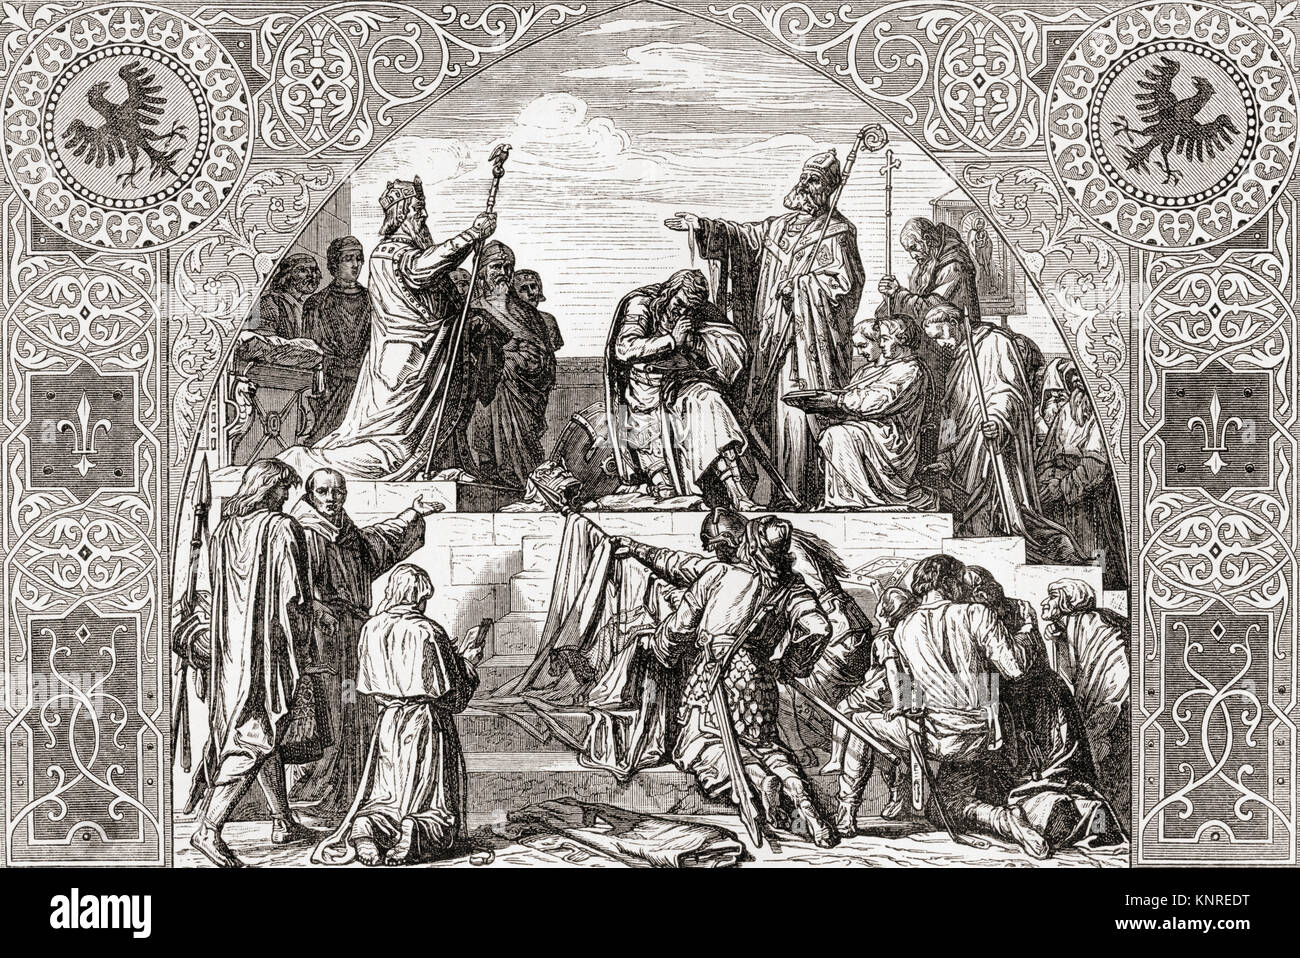 Baptism of Widukind at Attigny 785.   Widukind, aka Widuking or Wittekind.  Germanic leader of the Saxons.   From Ward and Lock's Illustrated History of the World, published c.1882. Stock Photo